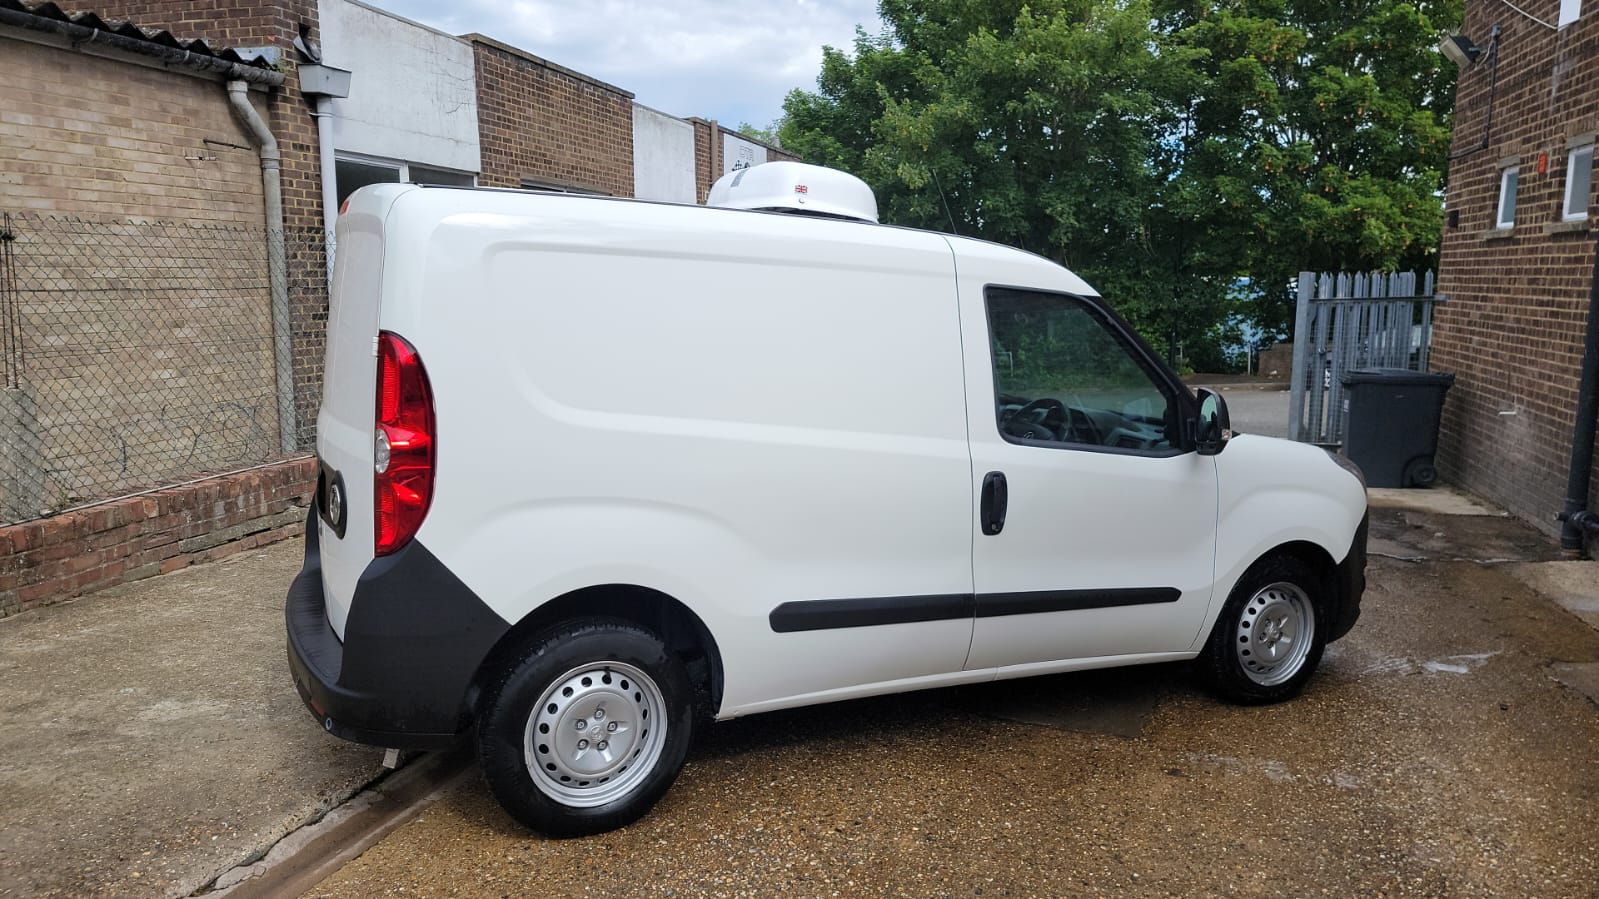 The Top 5 Benefits of Using a Refrigerated Van for Your Butcher Deliveries